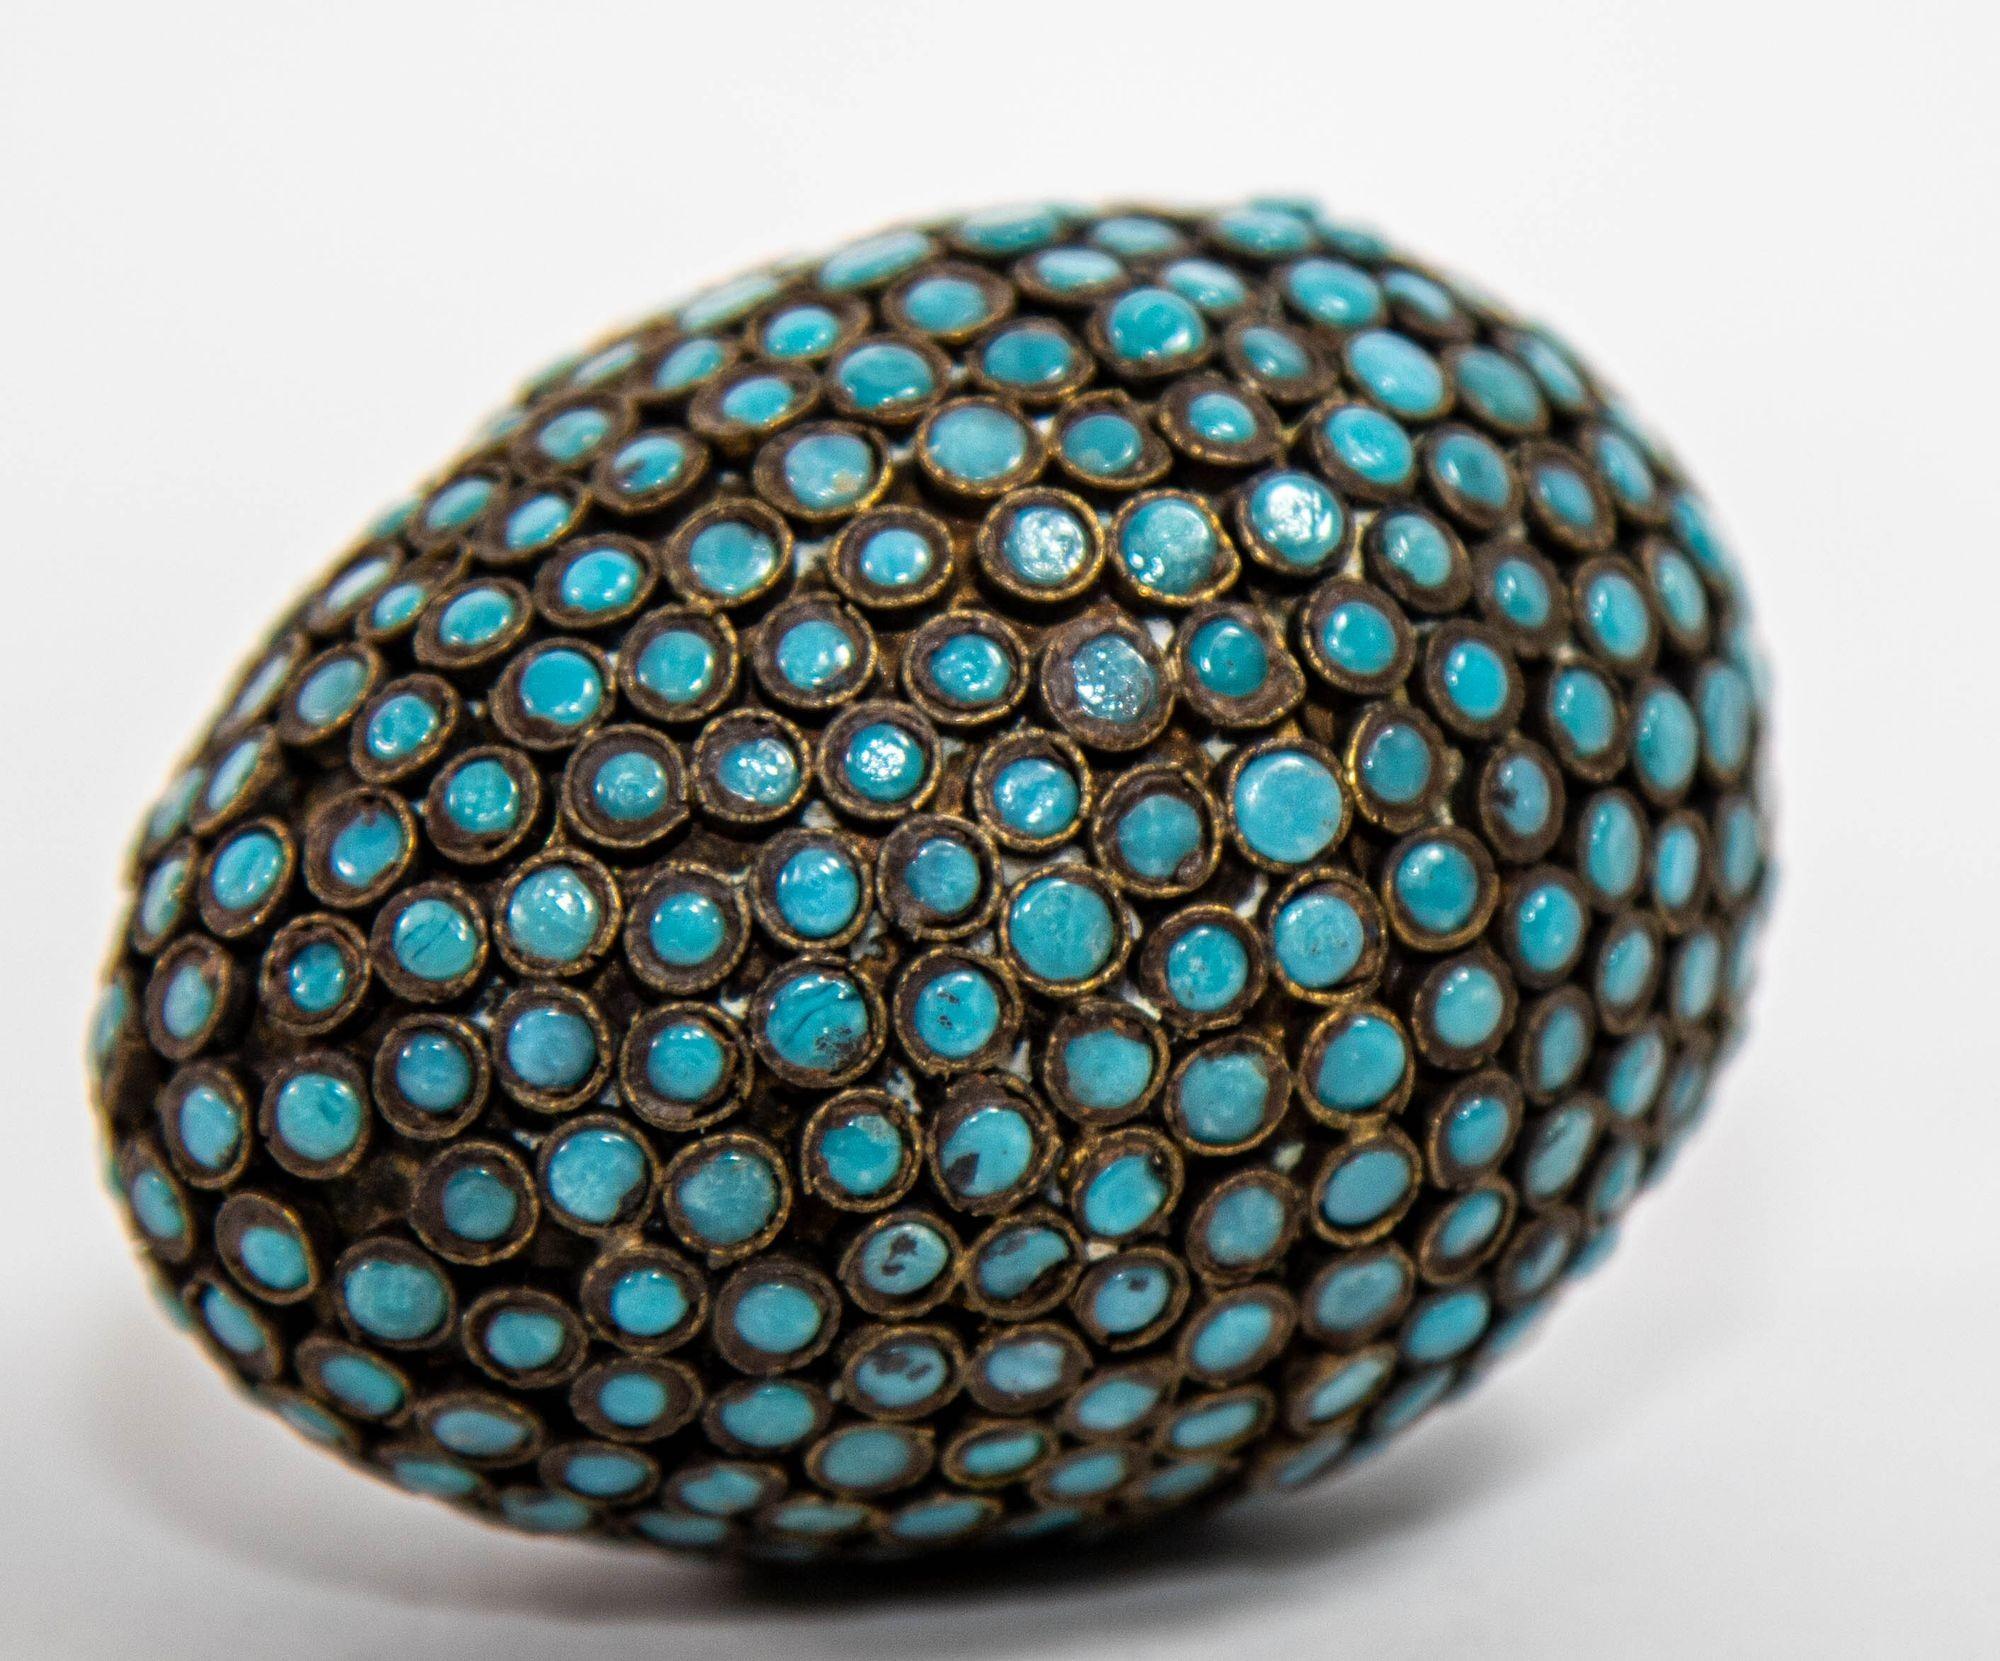 Nepalese Antique Tibetan Egg Shaped Box with Turquoise Blue Stone Inlay For Sale